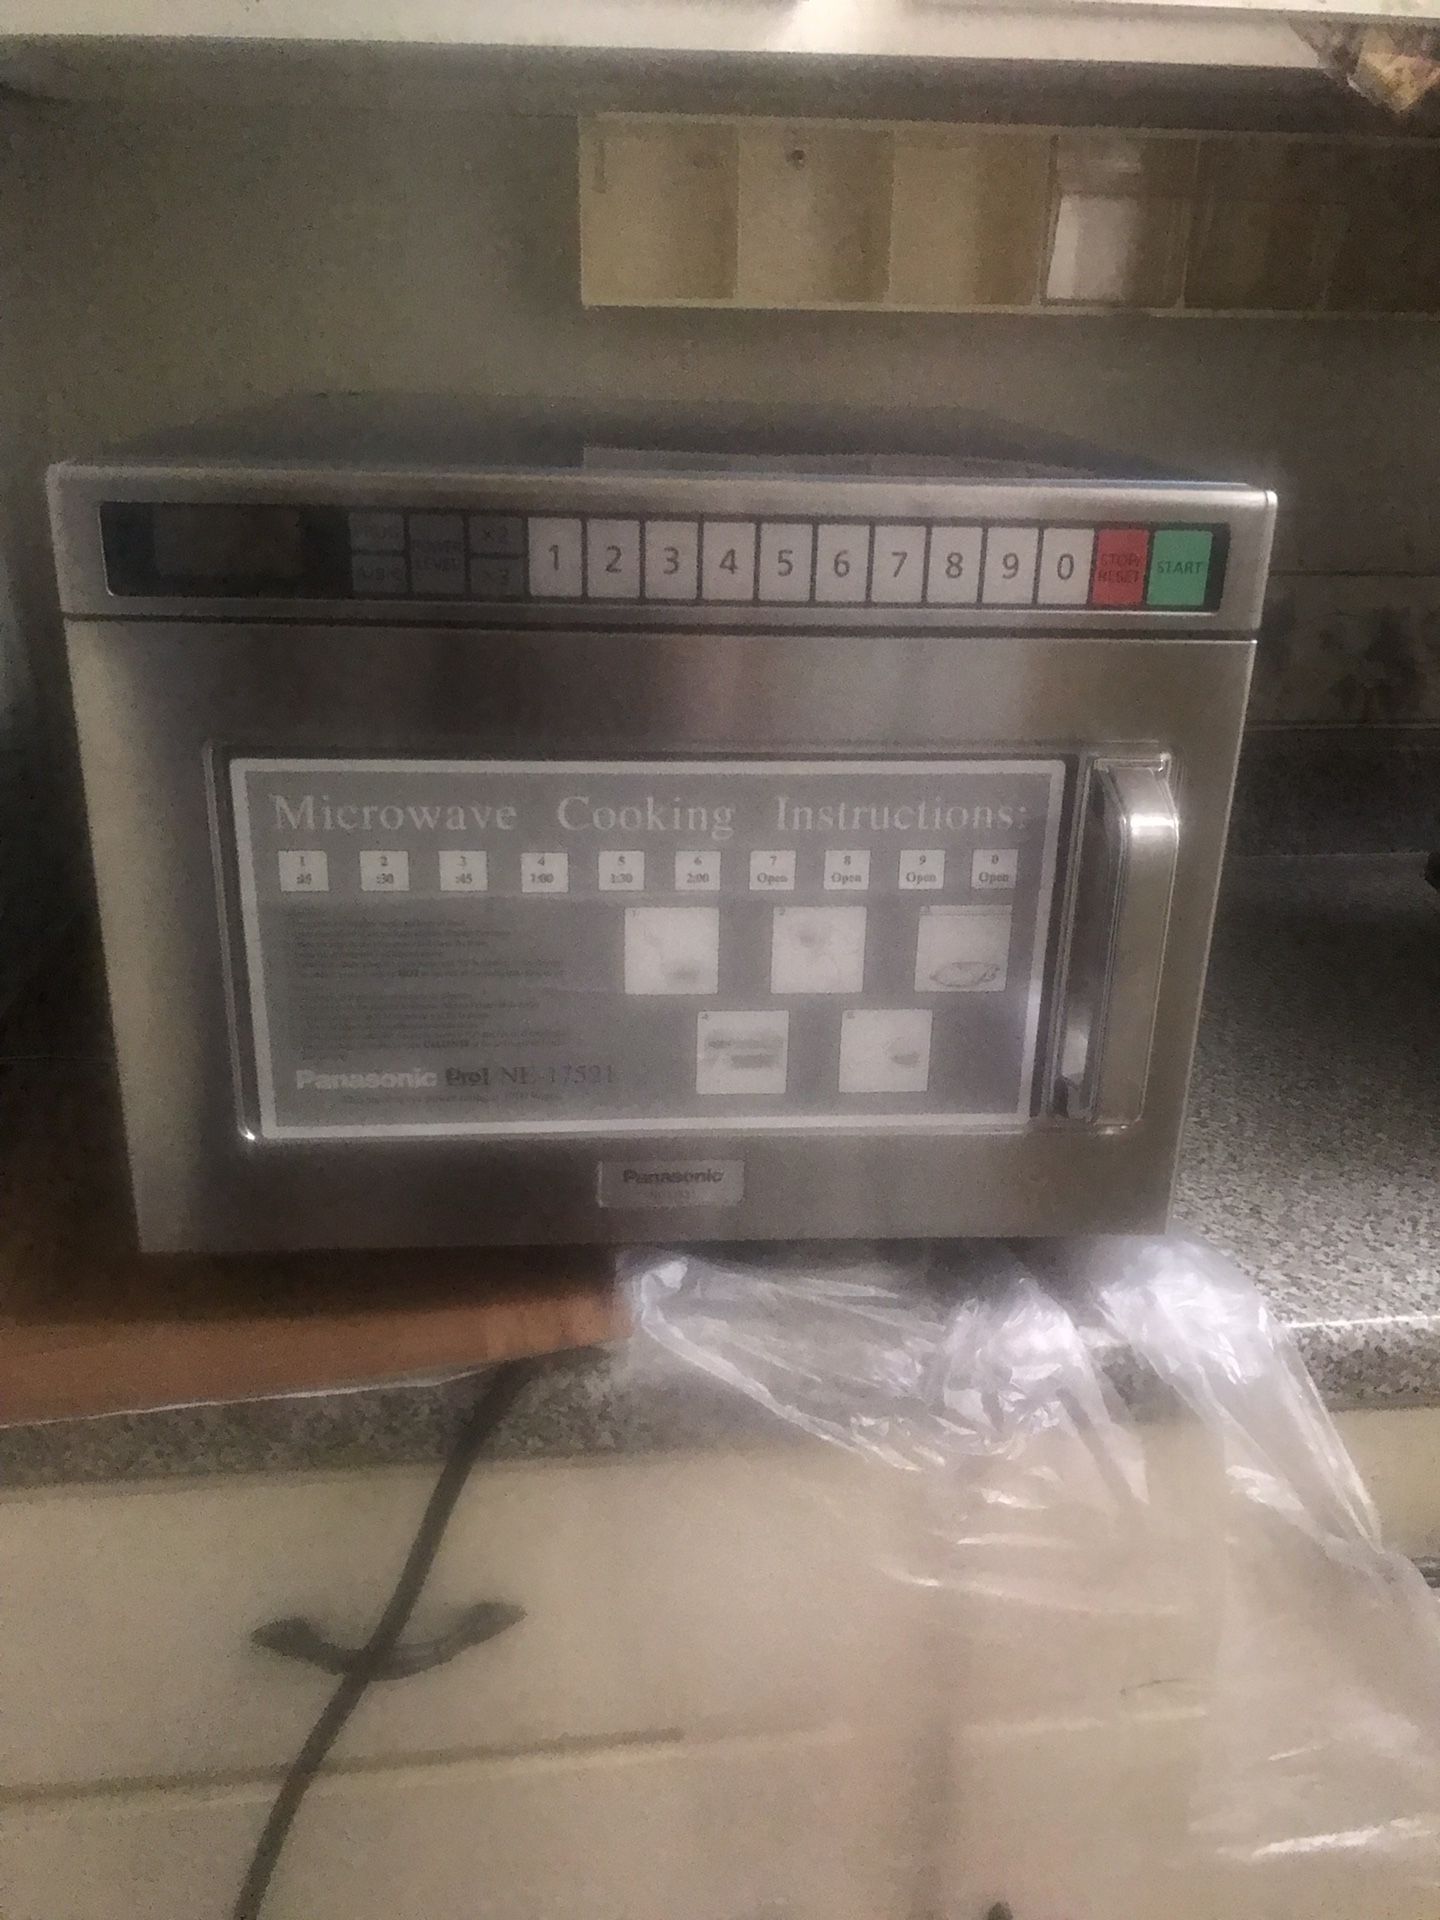 Comercial microwave NEW